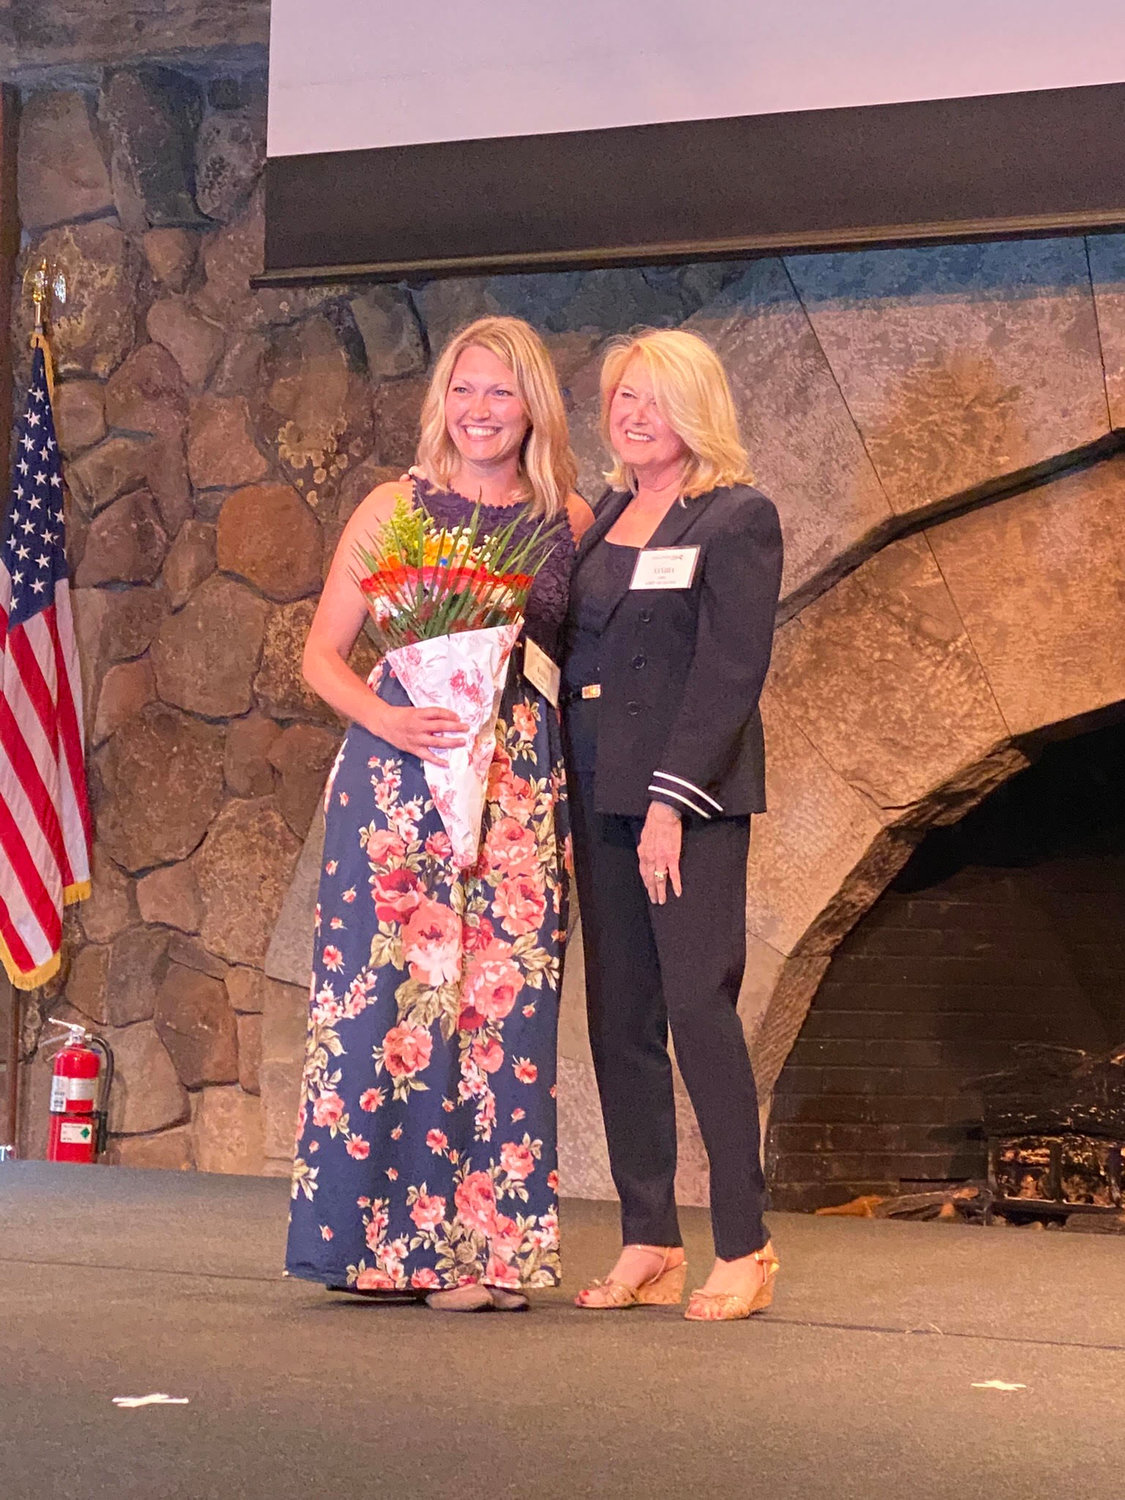 Sandra Gerry, founding board chair of Sullivan 180, presented a surprise Turtle Award to the Healthier Generation advisor of the year, Kayla O’Dell of Sullivan West Elementary School.